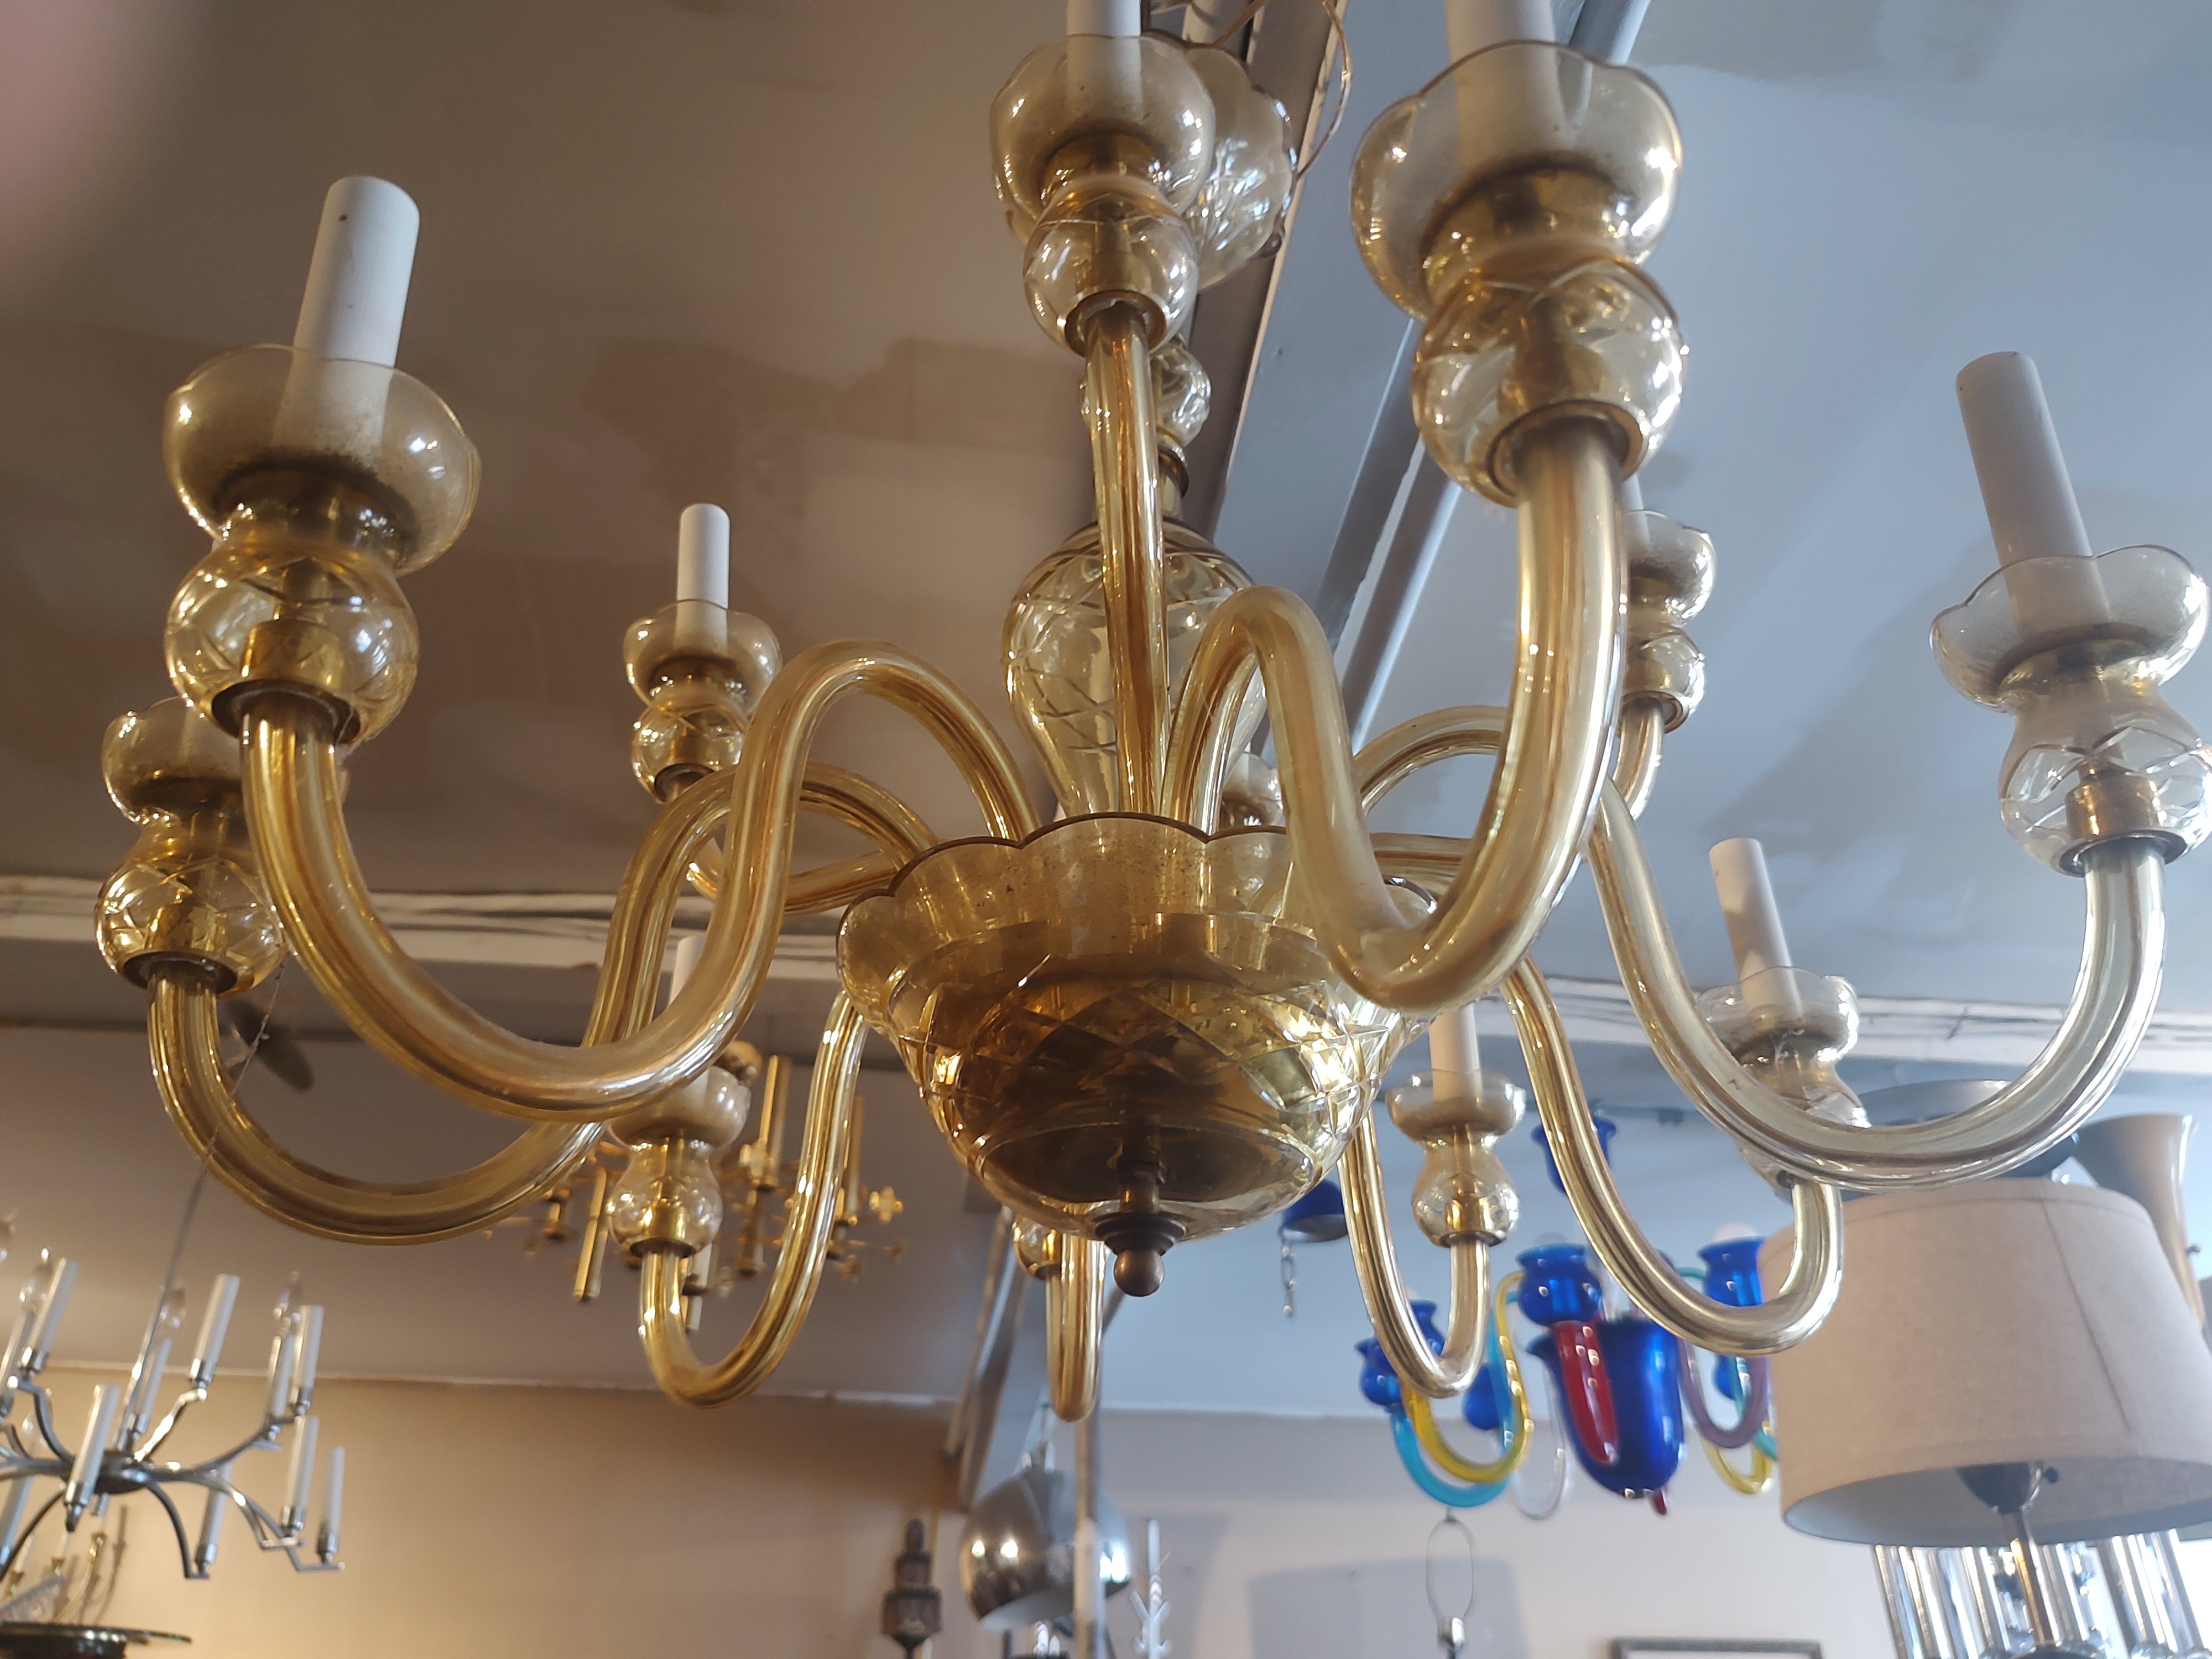 Fabulous amber colored hand crafted Murano 12 light chandelier attributed to Gino Vistosi. Two tiers of lighting with 8 on the lower portion and 4 on the upper. In excellent vintage condition, all new sleeves on the sockets, wiring remains fresh.